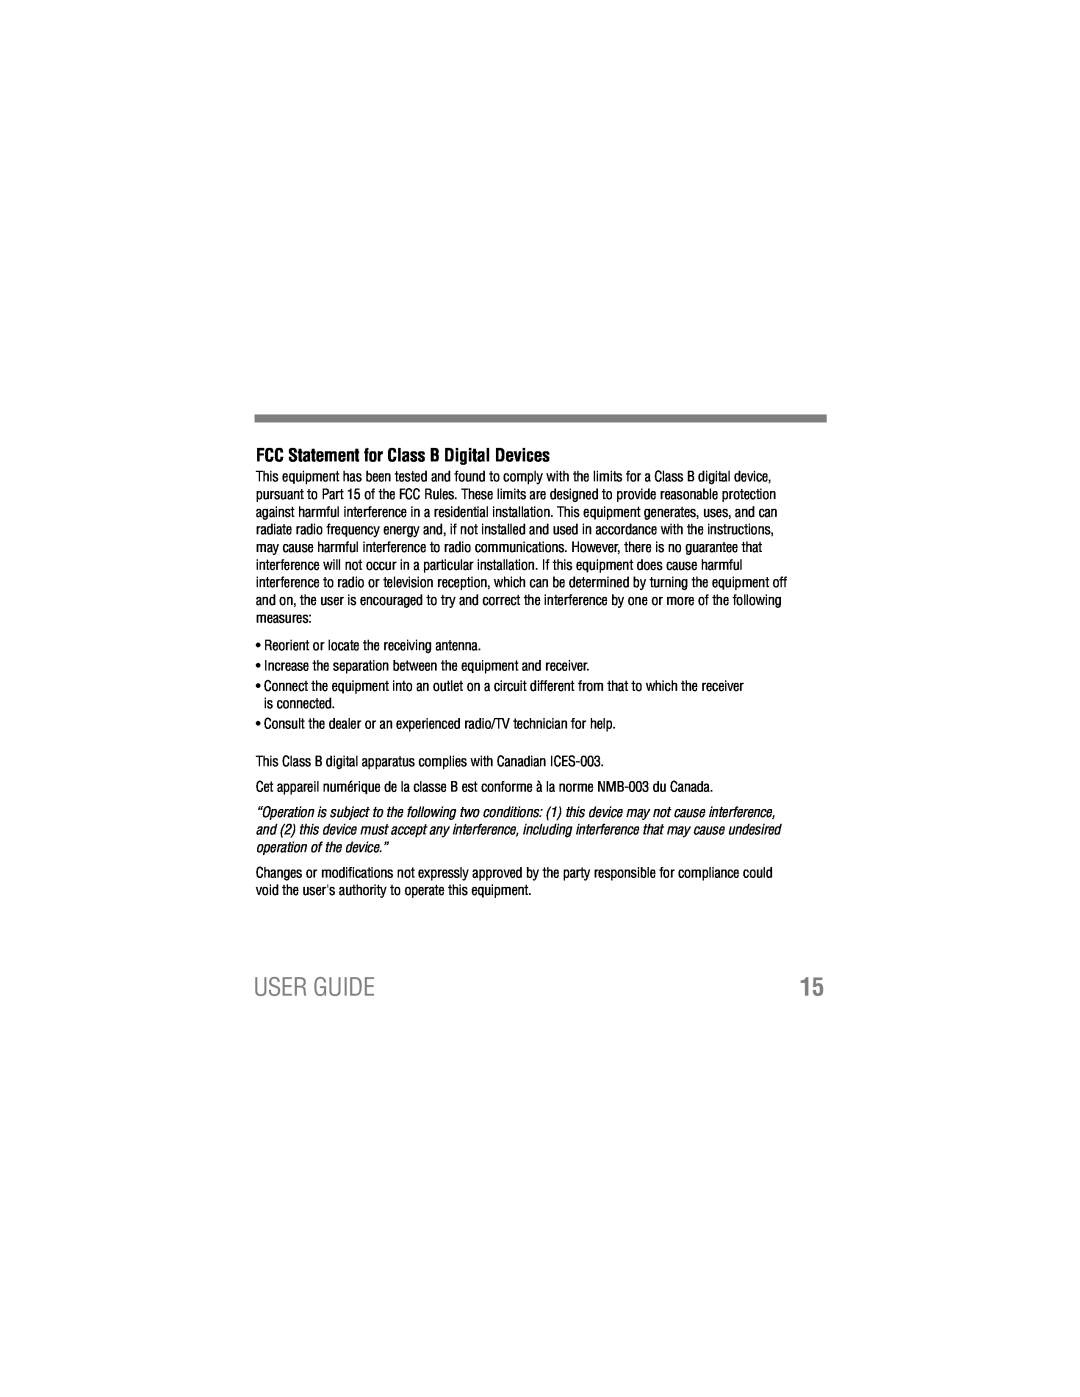 Tekkeon ET2000 manual FCC Statement for Class B Digital Devices, User Guide 